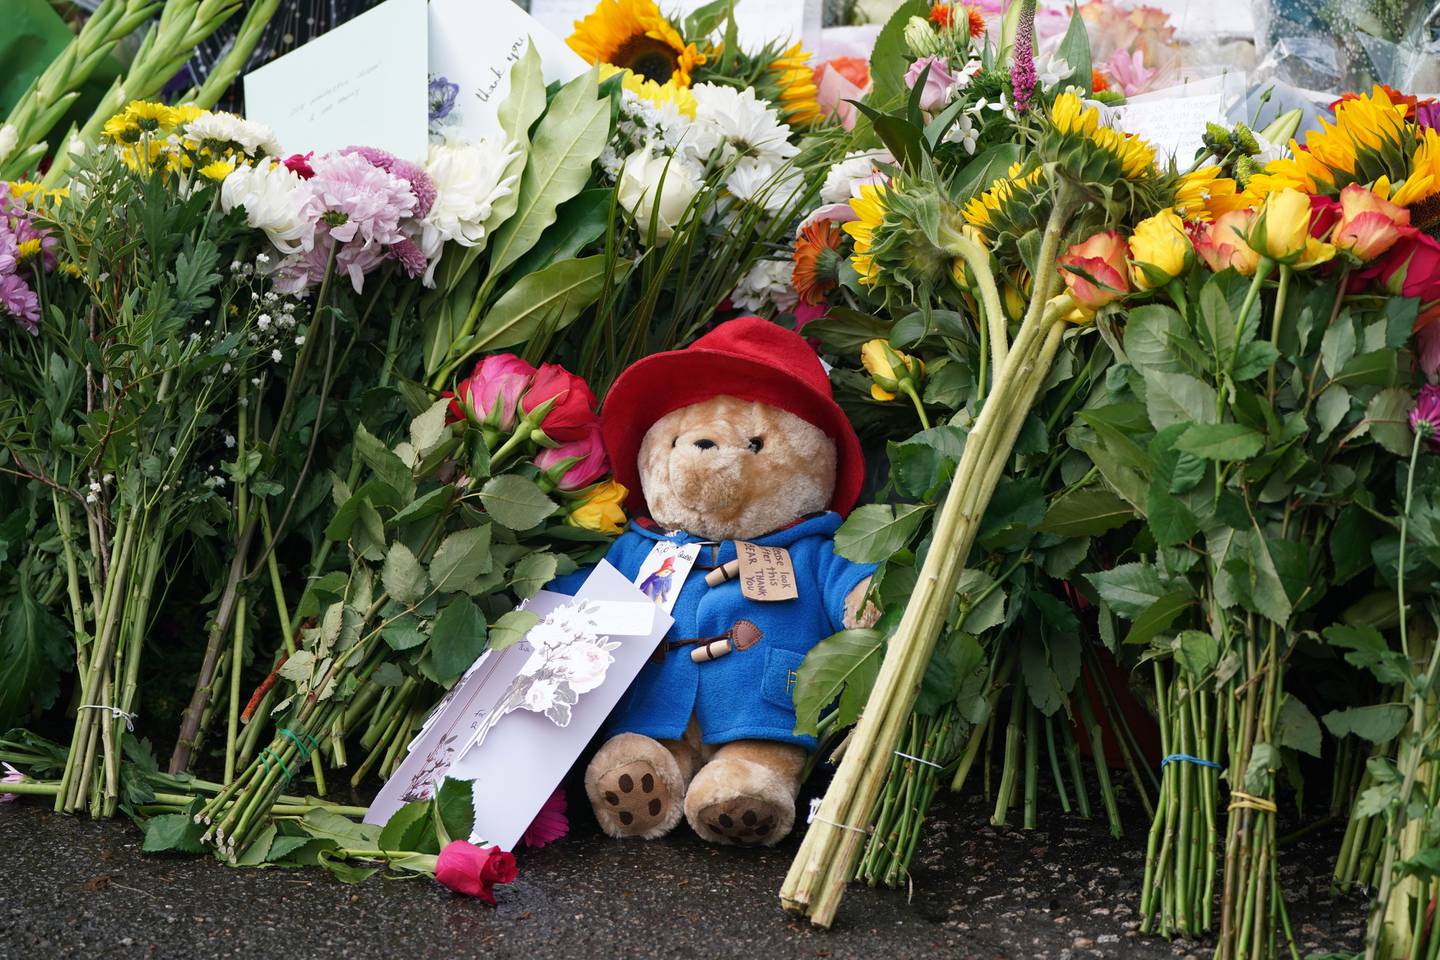 Floral tributes and a Paddington teddy bear at the gates of Balmoral in Scotland after the death of Queen Elizabeth. PA